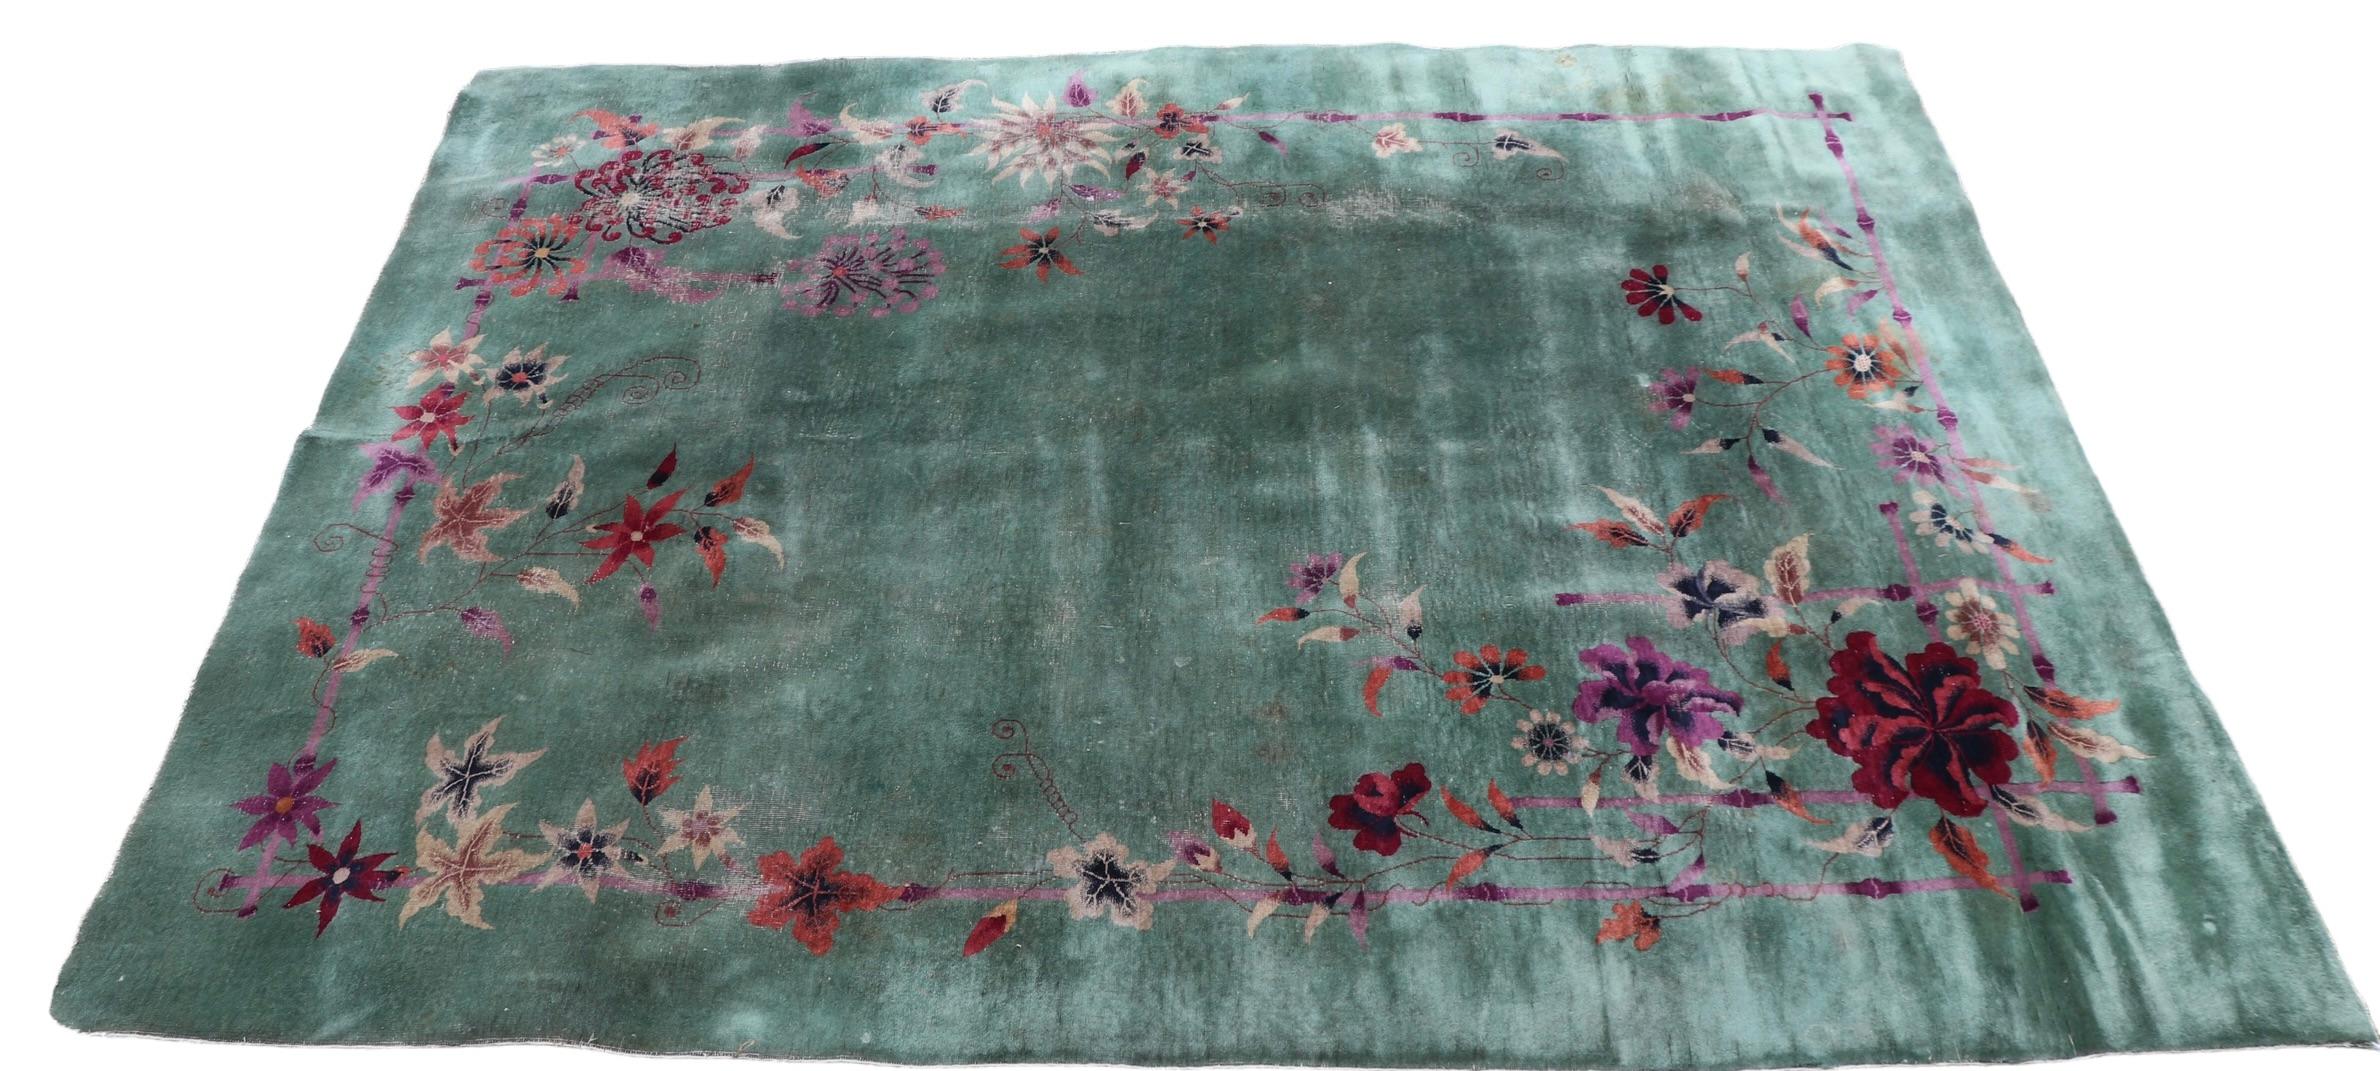  Hand Knotted Wool Art Deco Chinese Rug c. 1920/1930's For Sale 6